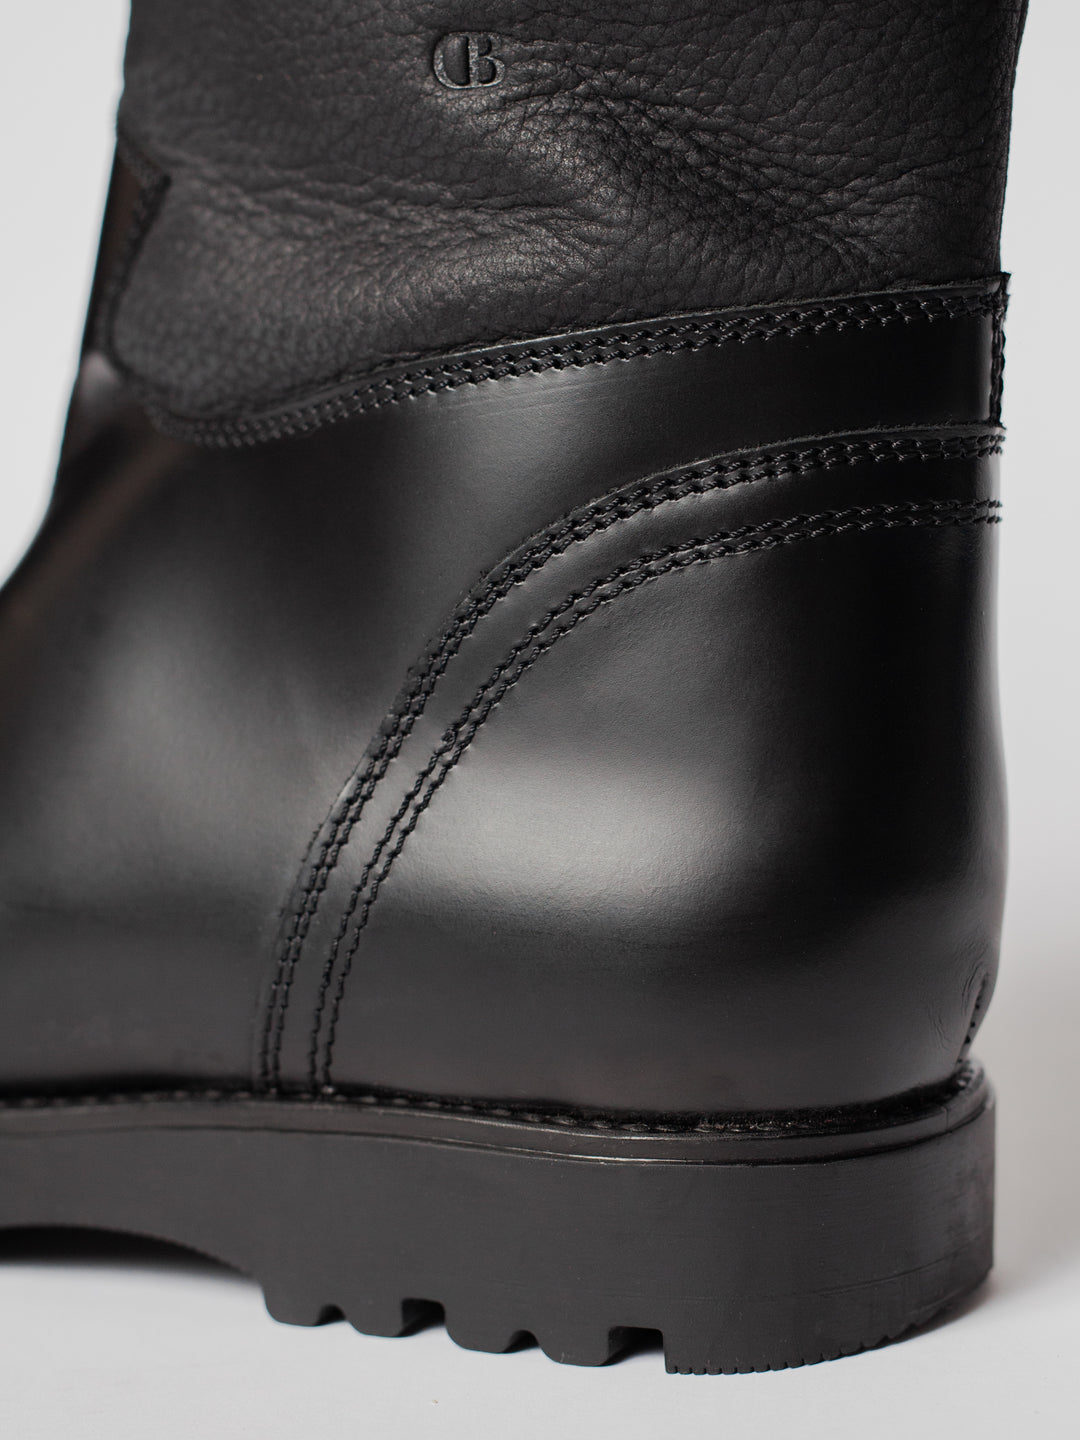 Blankens The Alexia Low Eco black low boot with handles. warm with fuzzy wool lining. water resistant. detail photo of the back with CB logo